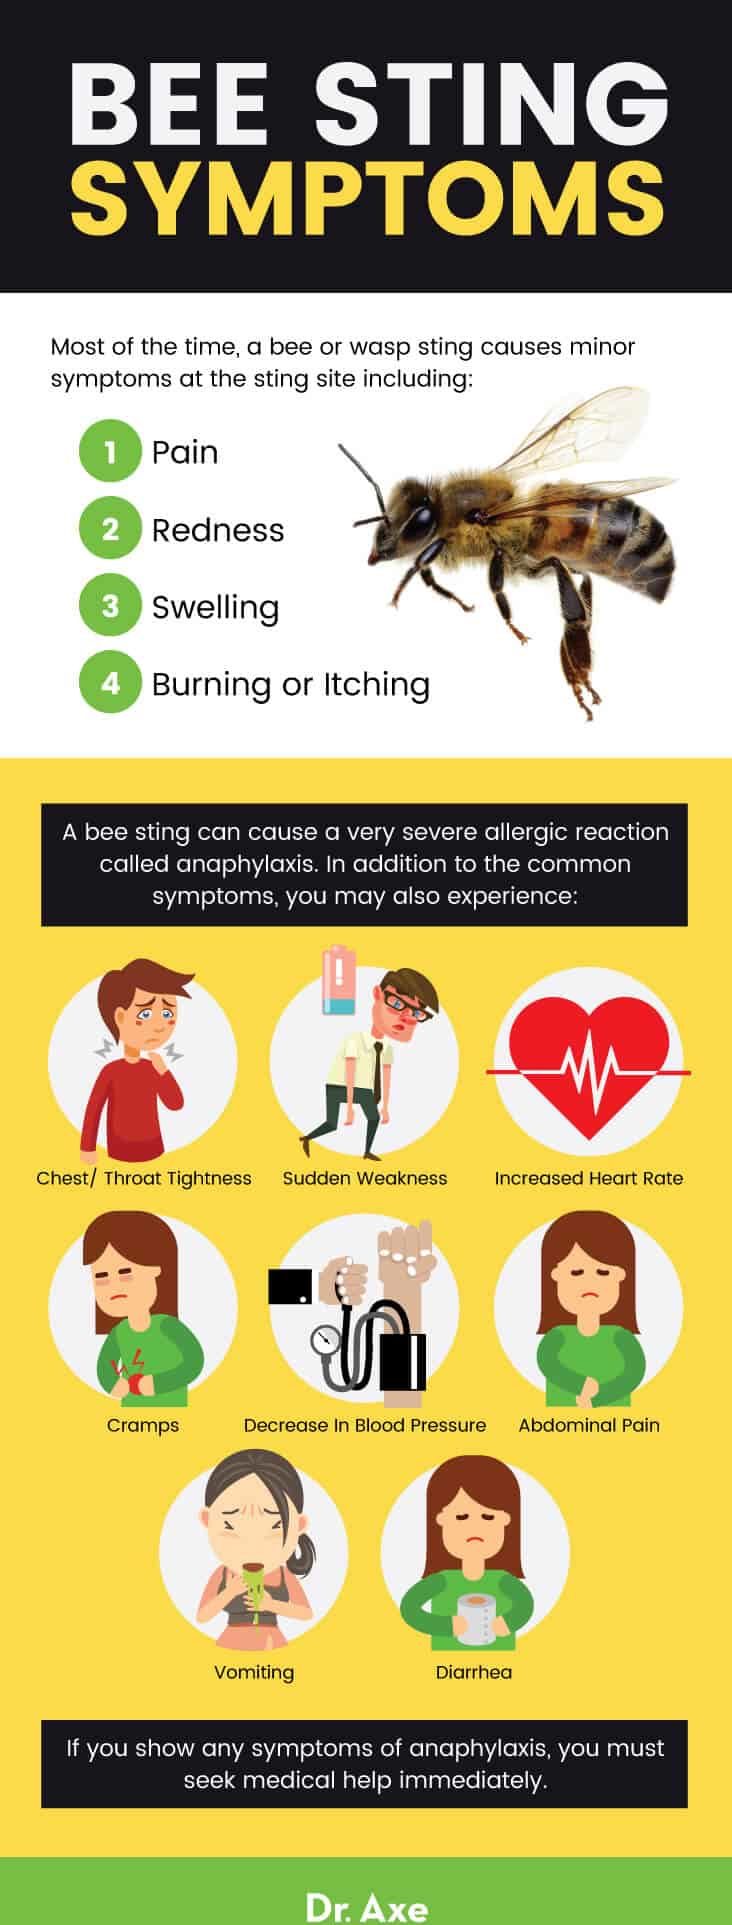 Bee sting treatment: bee sting symptoms - Dr. Axe